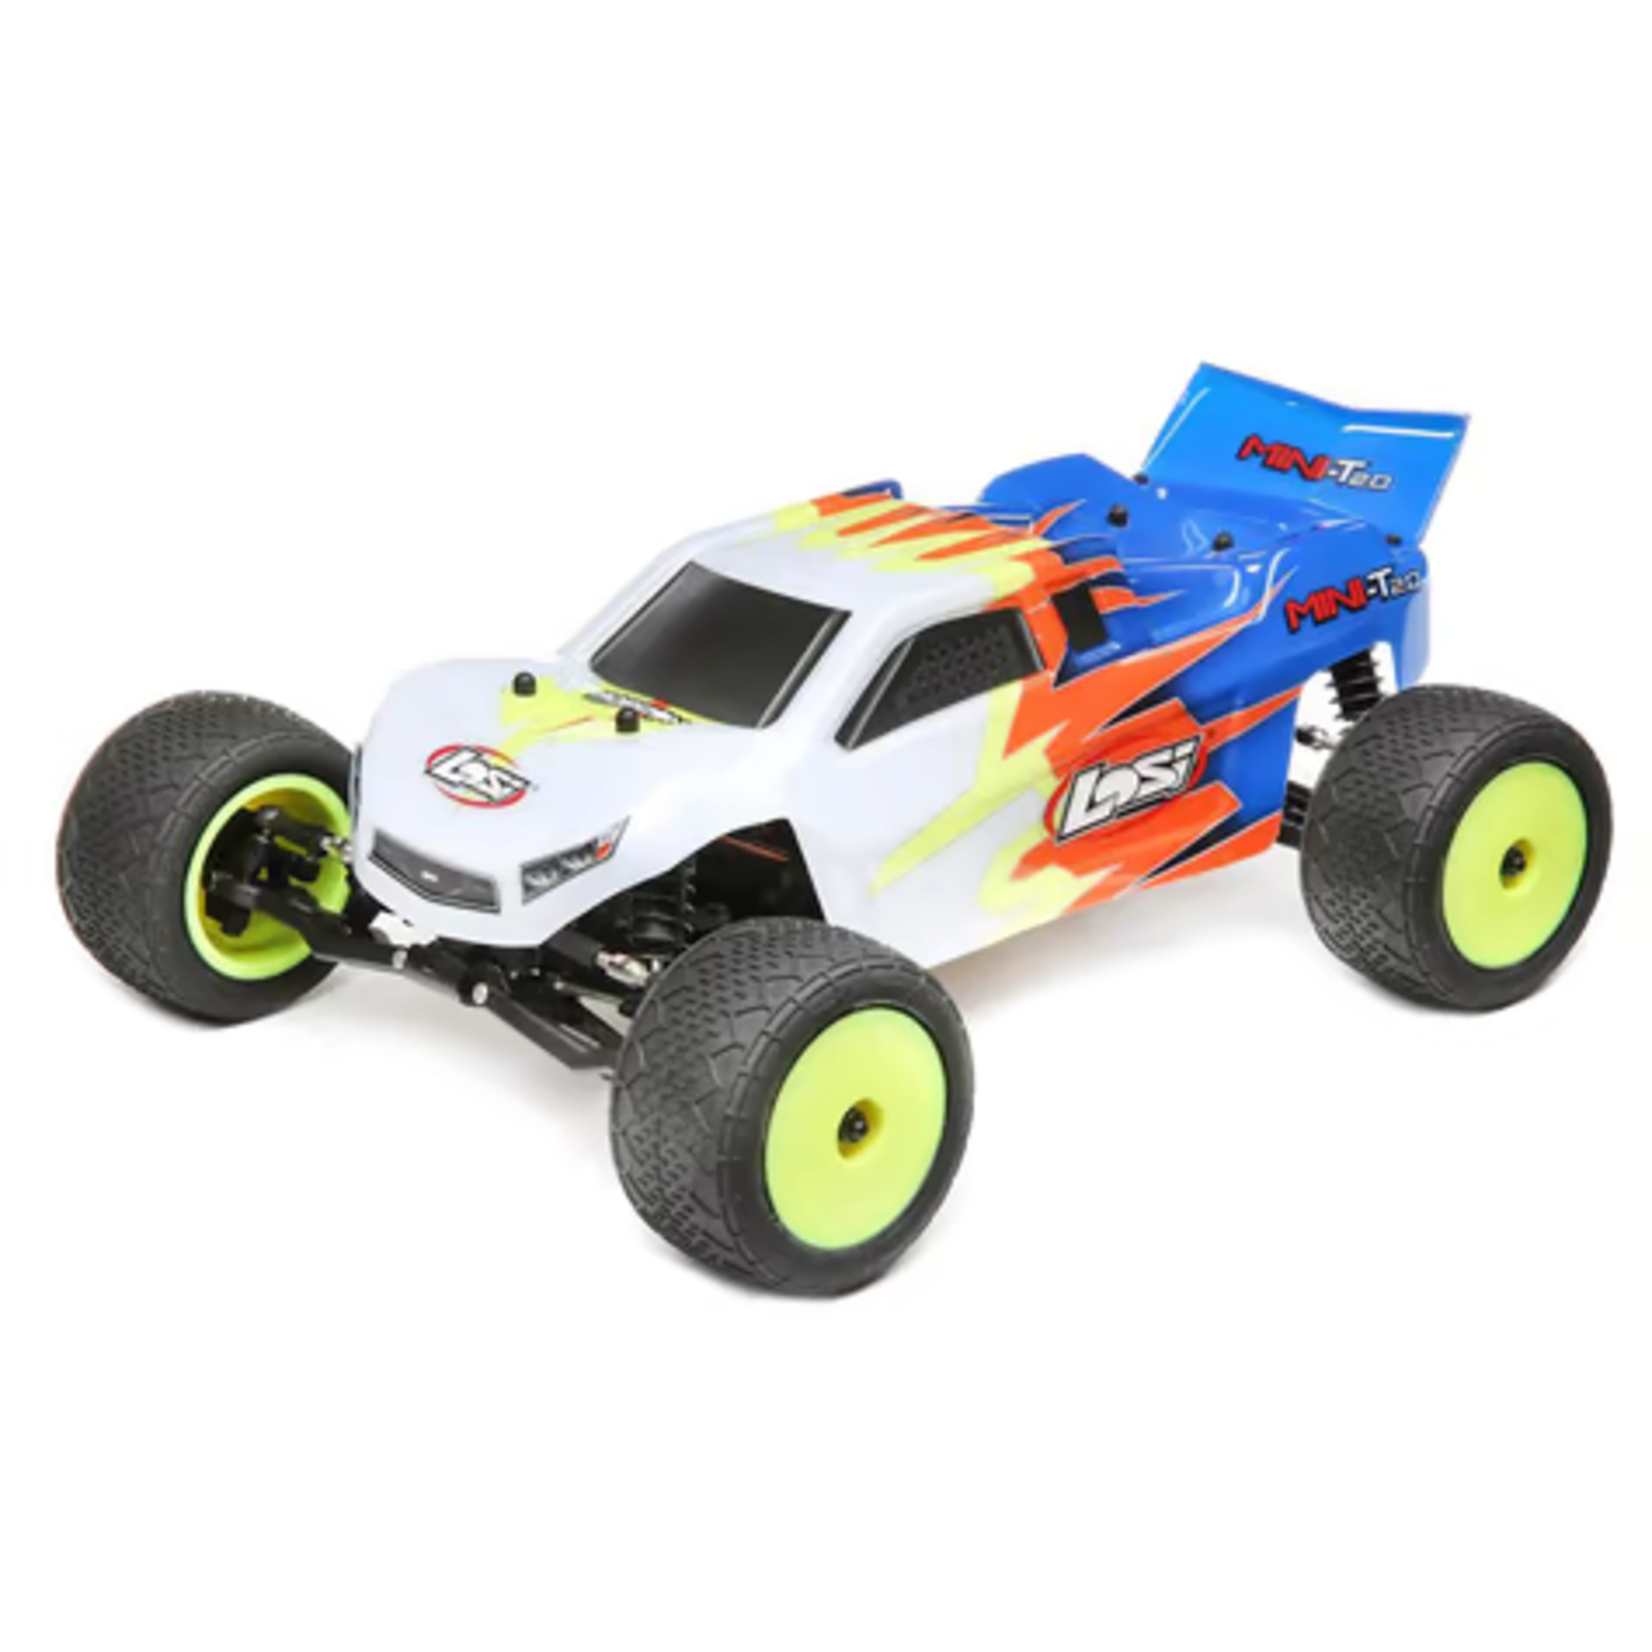 Losi Losi Mini-T 2.0 1/18 RTR 2wd Stadium Truck (Blue/White) w/2.4GHz Radio, Battery & Charger #LOS01015T2